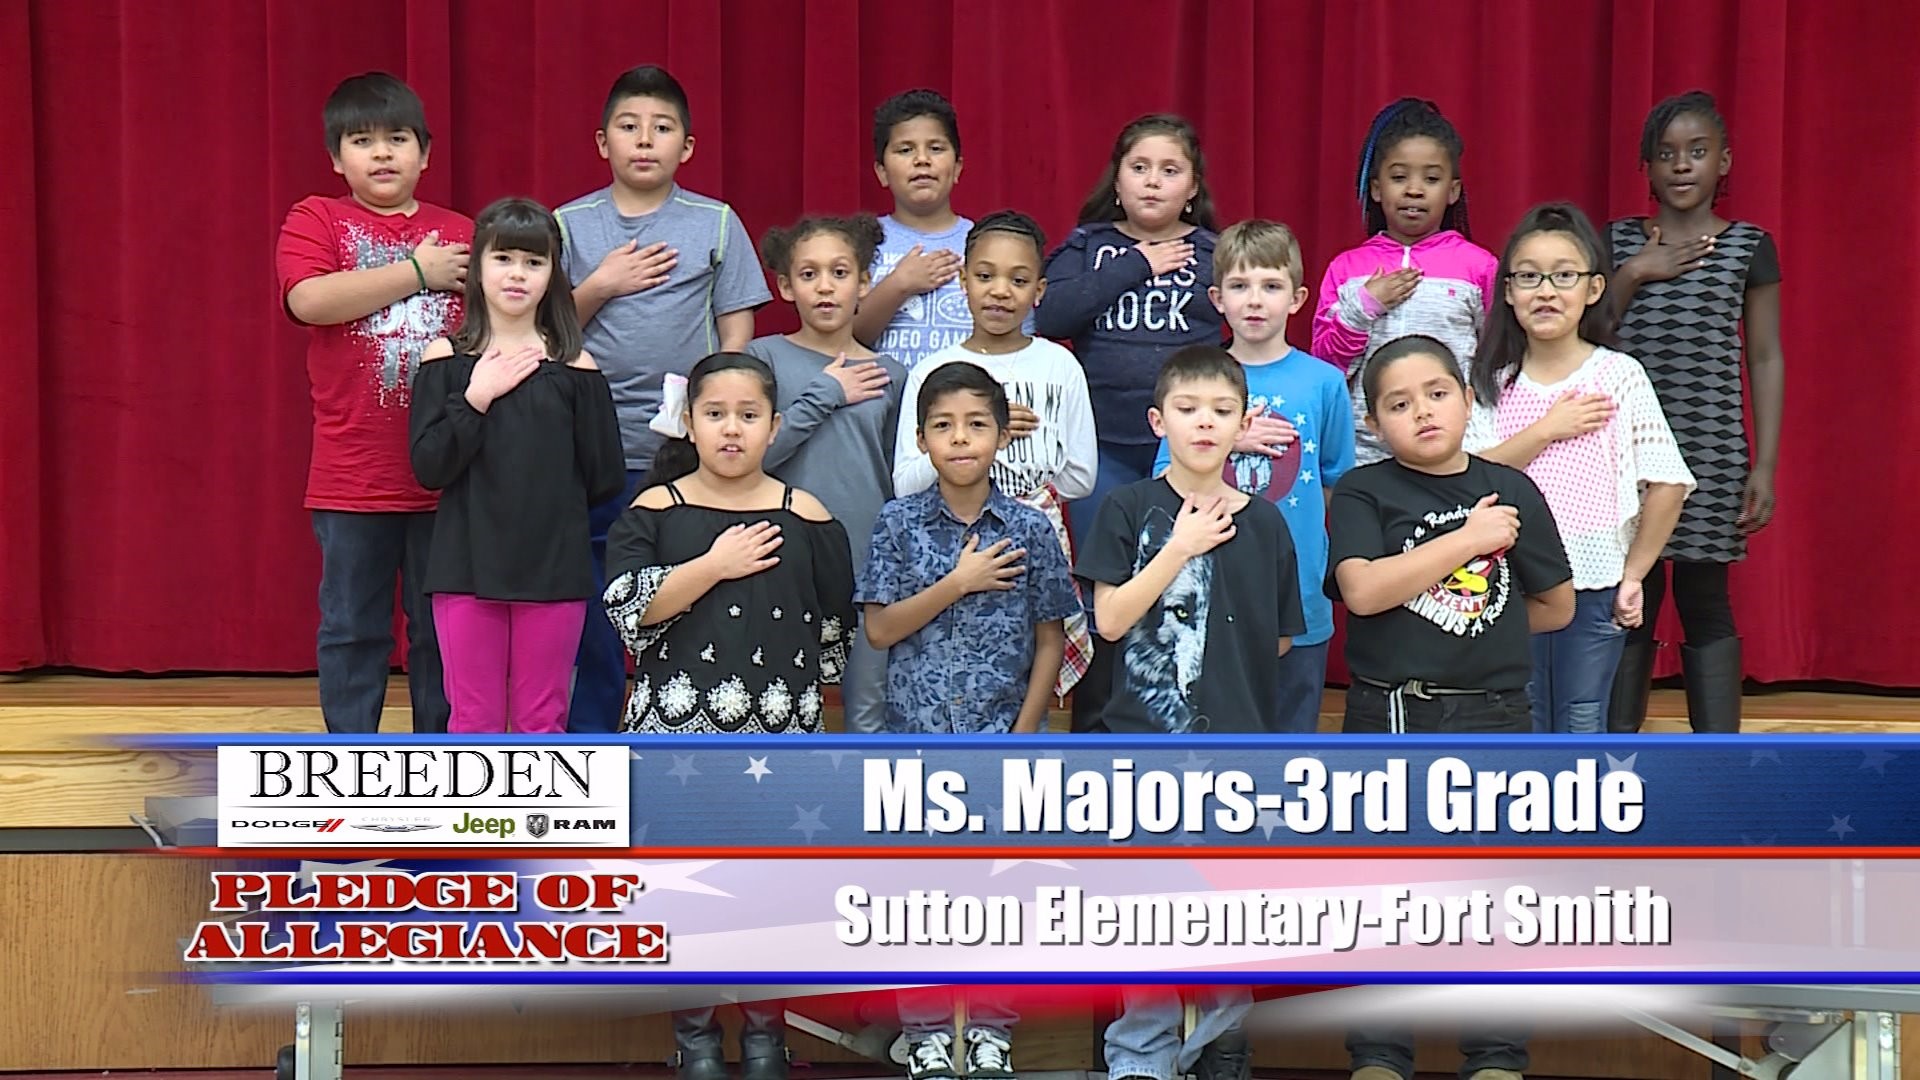 Ms. Majors  3rd Grade  Sutton Elementary  Fort Smith